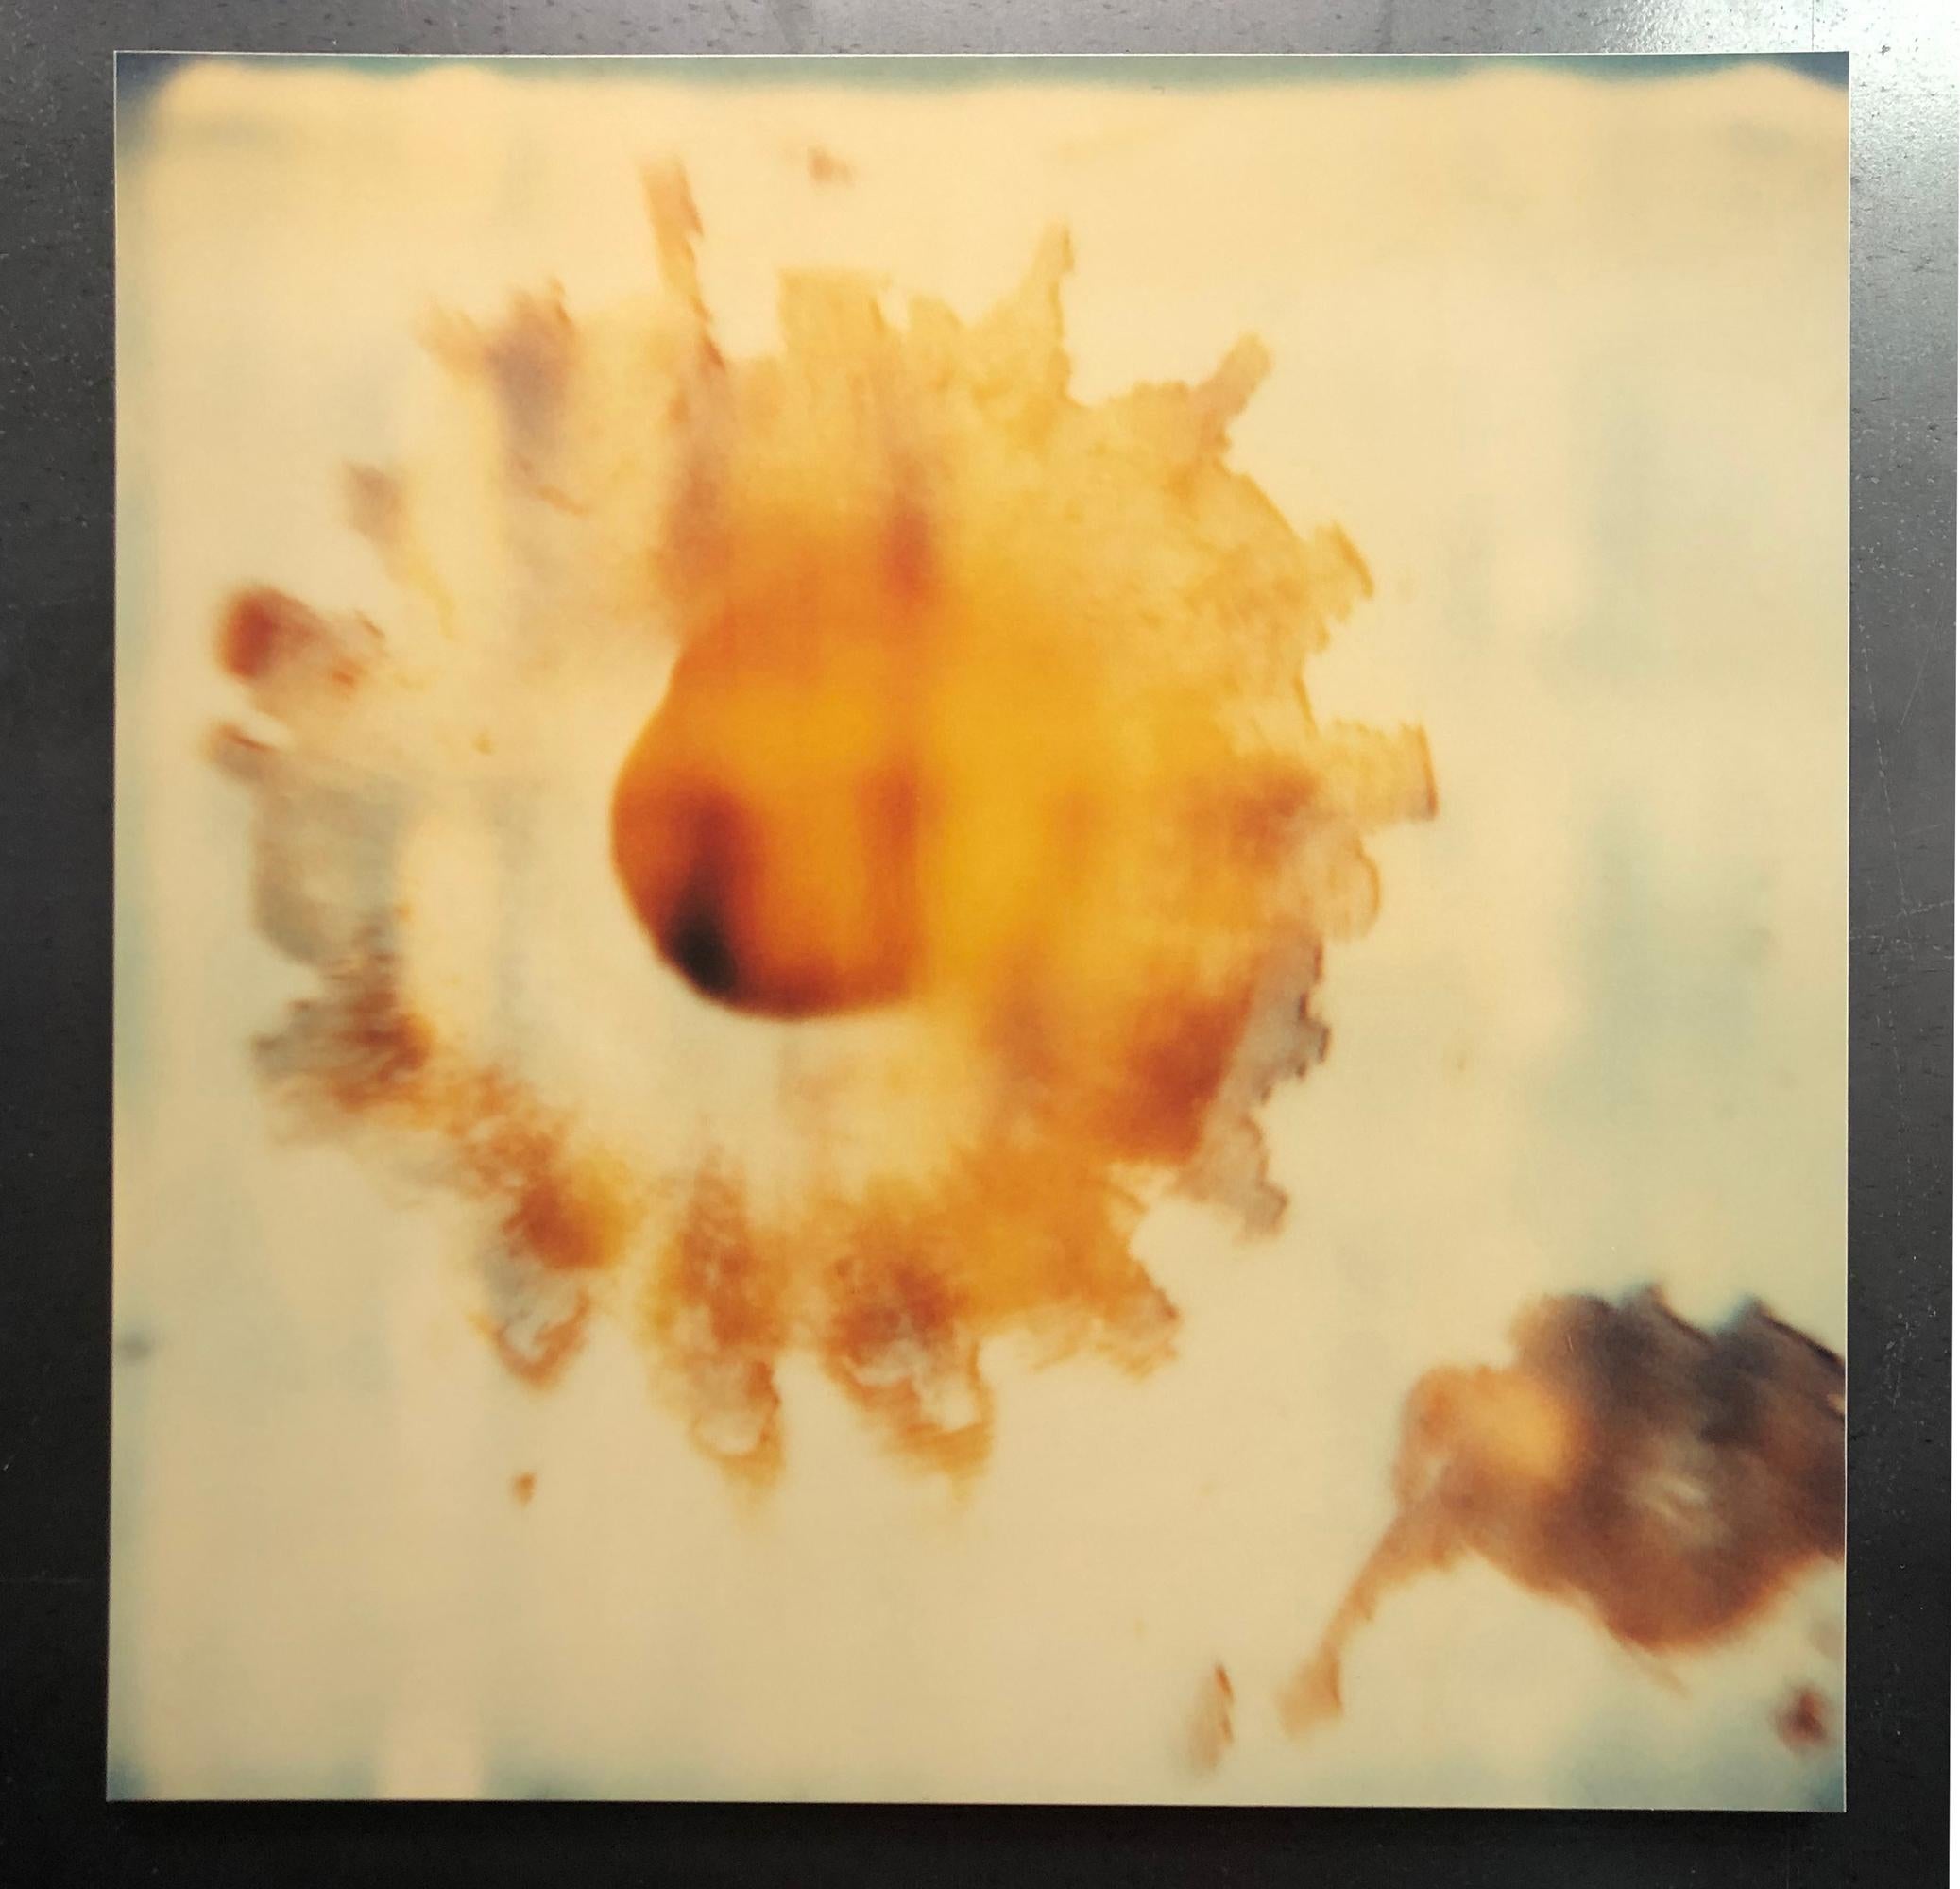 Impact (Wastelands) - 100x100cm, Polaroid, Contemporary, Abstract, Mounted - Photograph by Stefanie Schneider